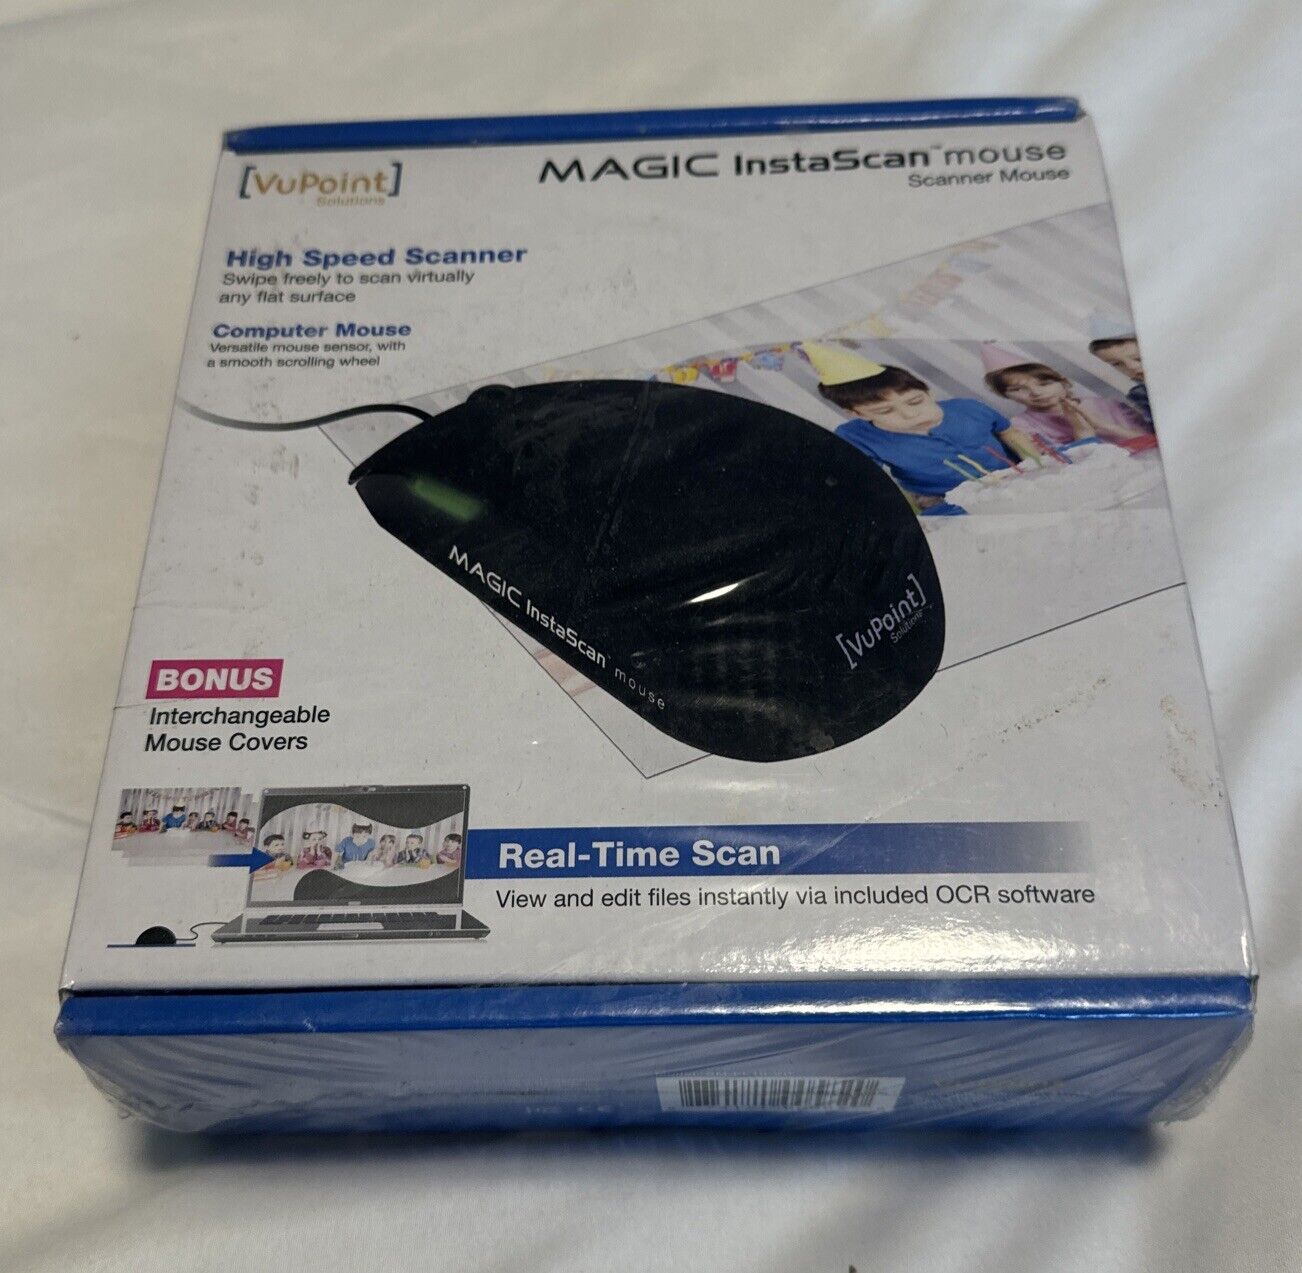 New Vupoint Magic InstaScan Mouse Scanning Mouse with Interchangeable Covers